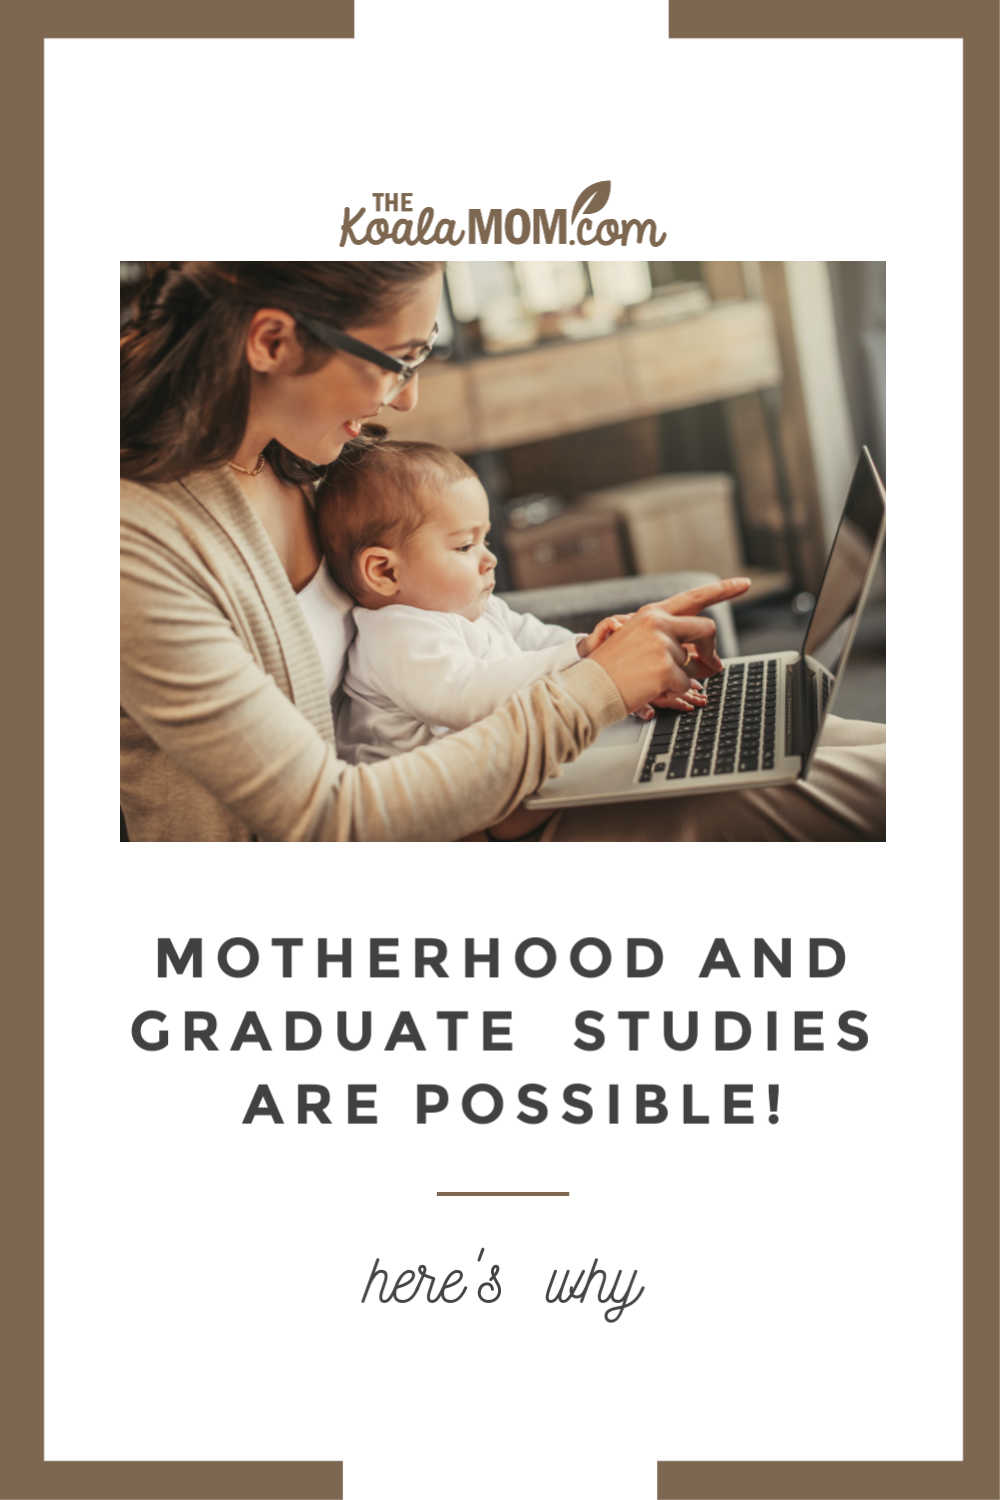 Motherhood and grad studies are possible! Here's why.